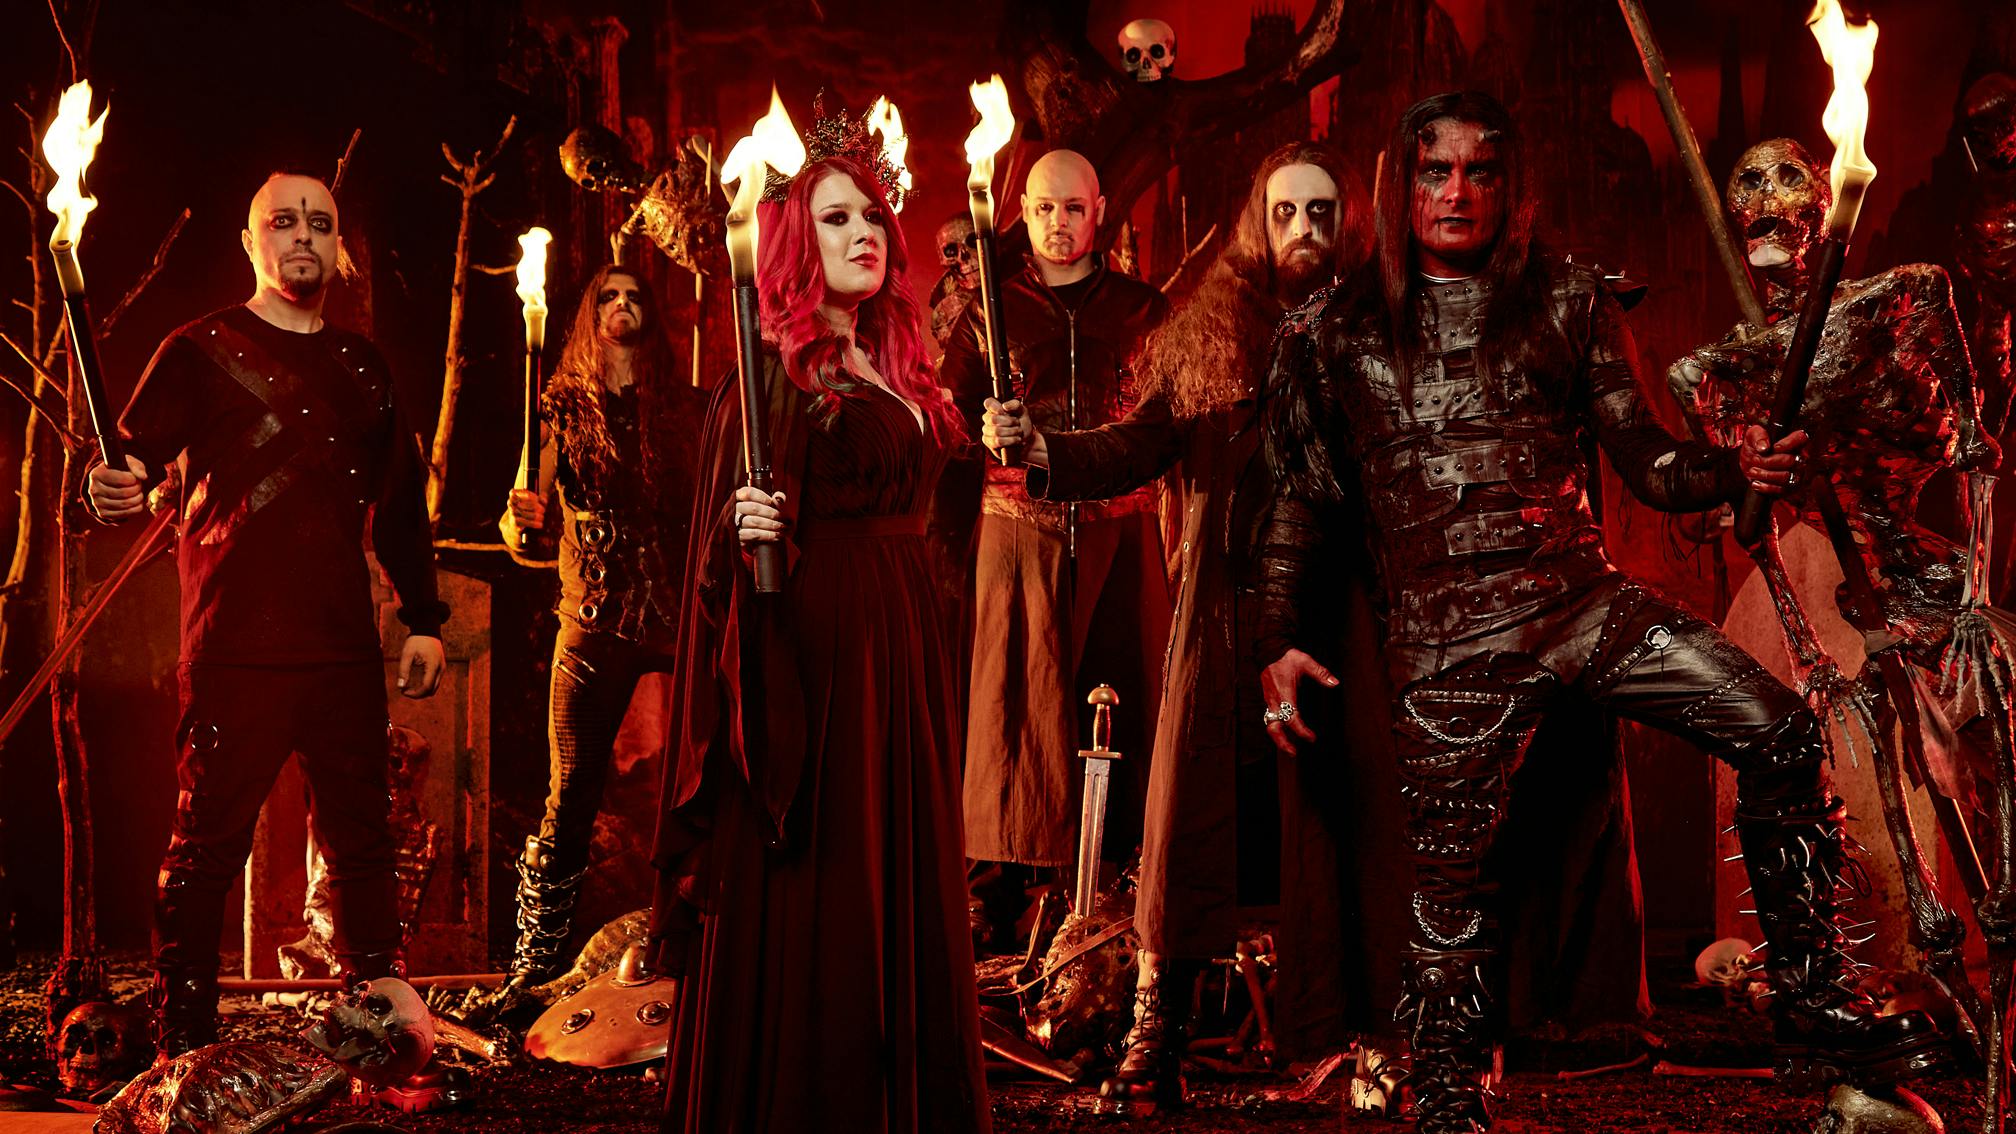 Cradle Of Filth have released a spooky new video for Necromantic Fantasies